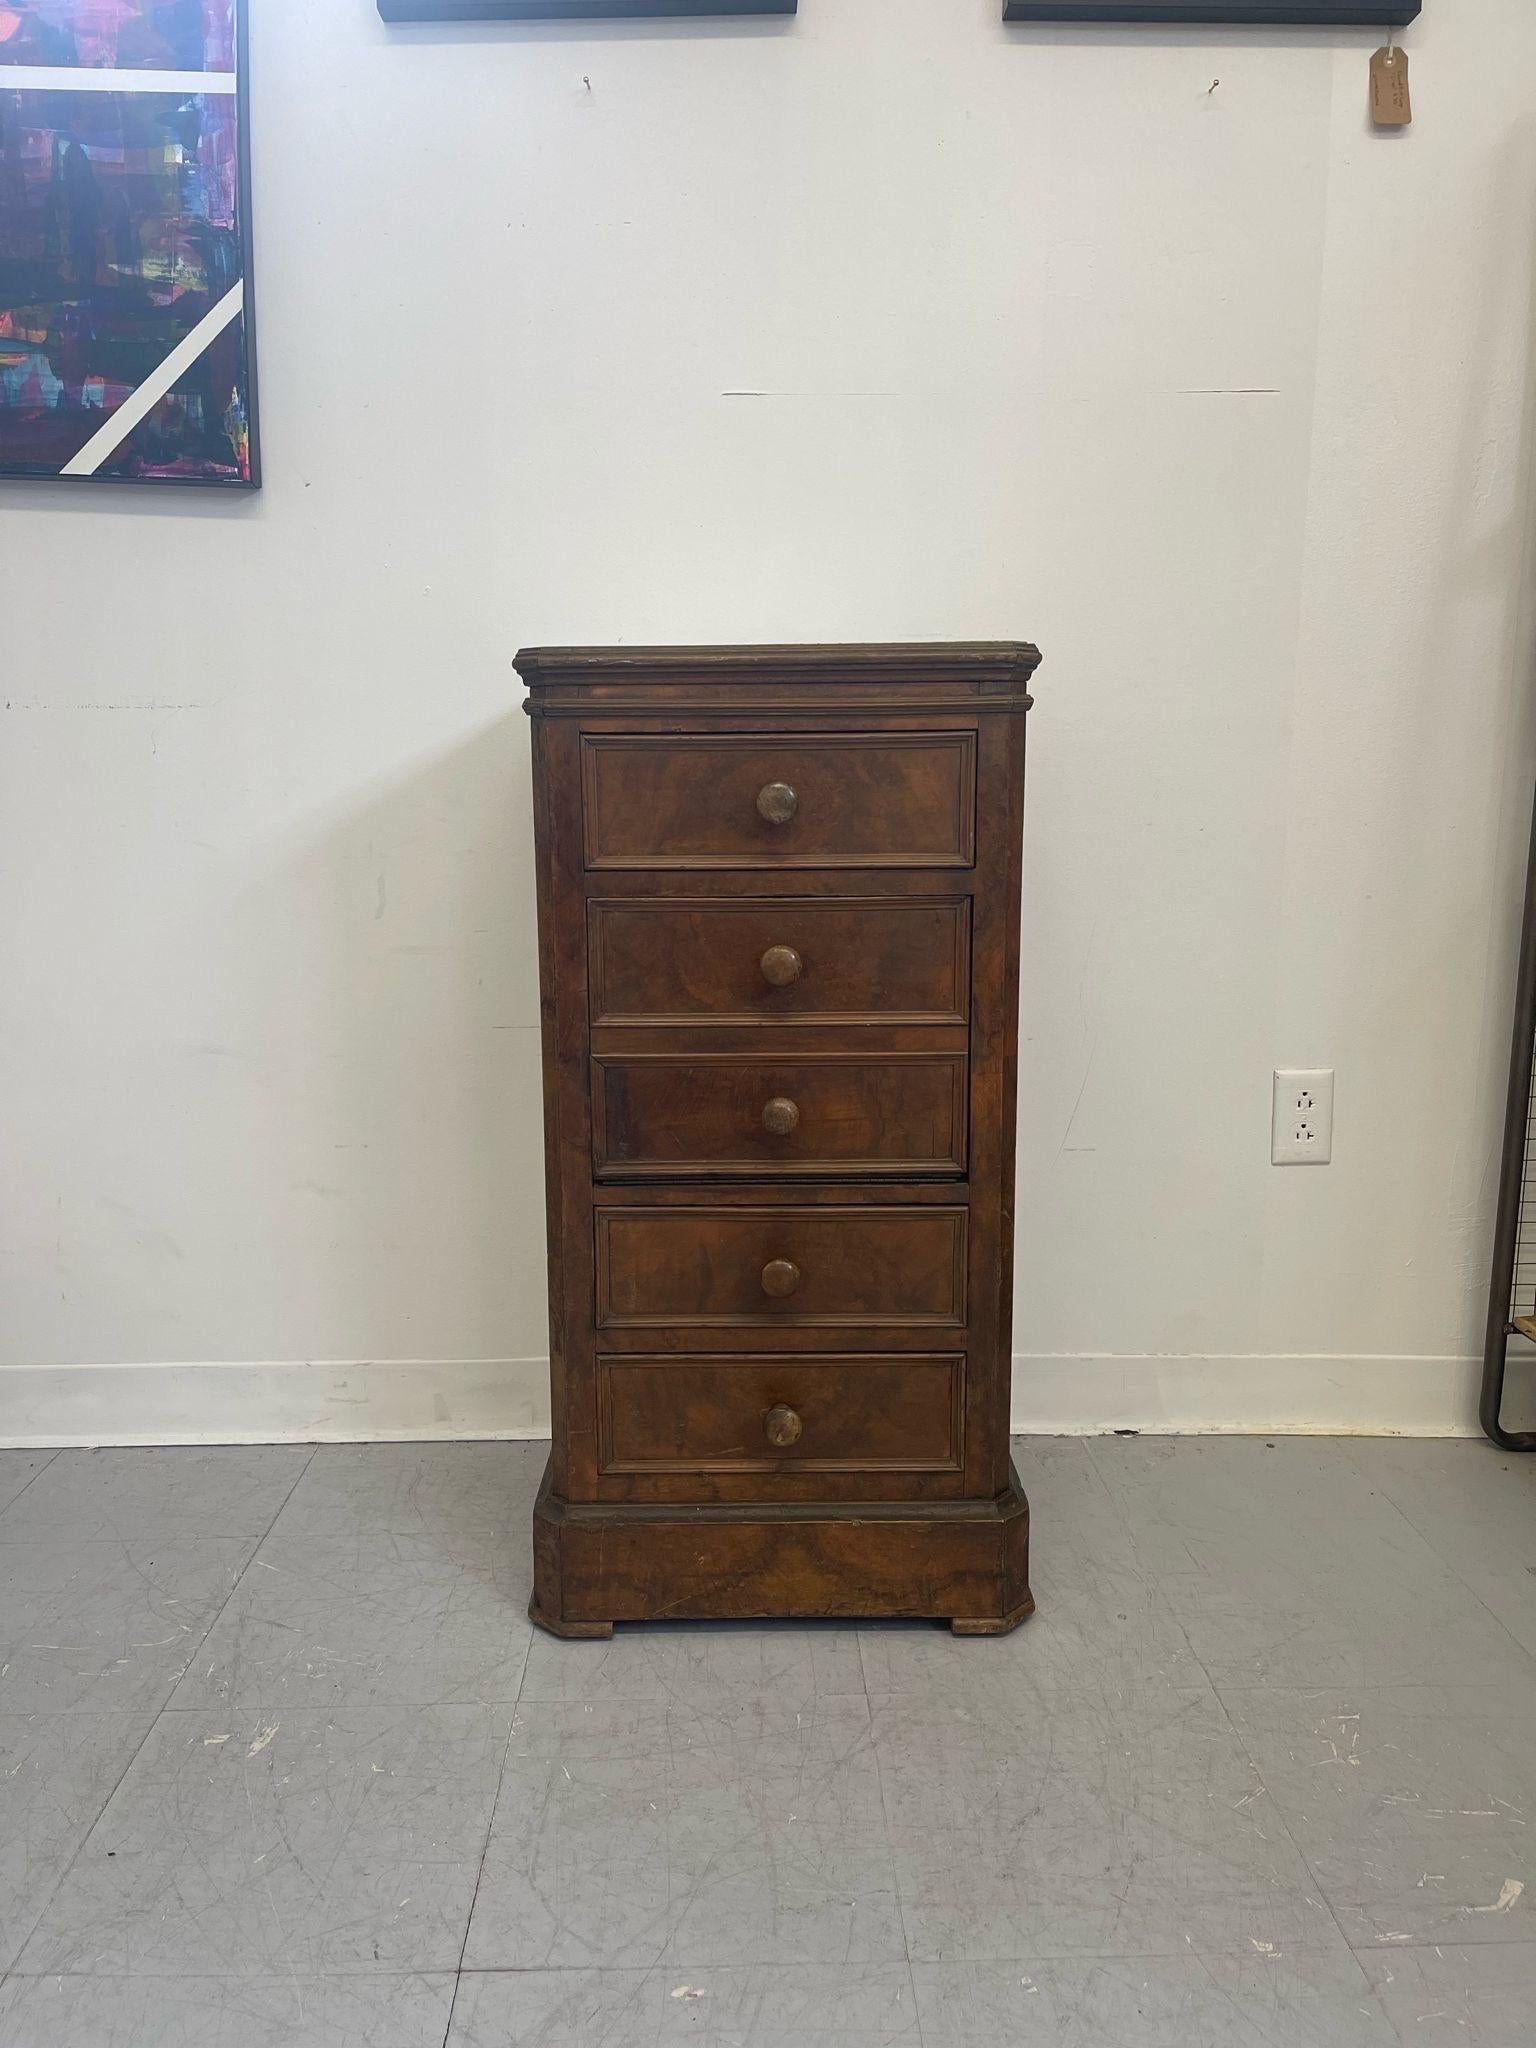 This Nightstand features 3 dovetailed drawers and 1 drop front cabinet space. Turned wood handles. Vintage Condition Consistent with Age as Pictured.

Dimensions. 18 W ; 16 D ; 36 H